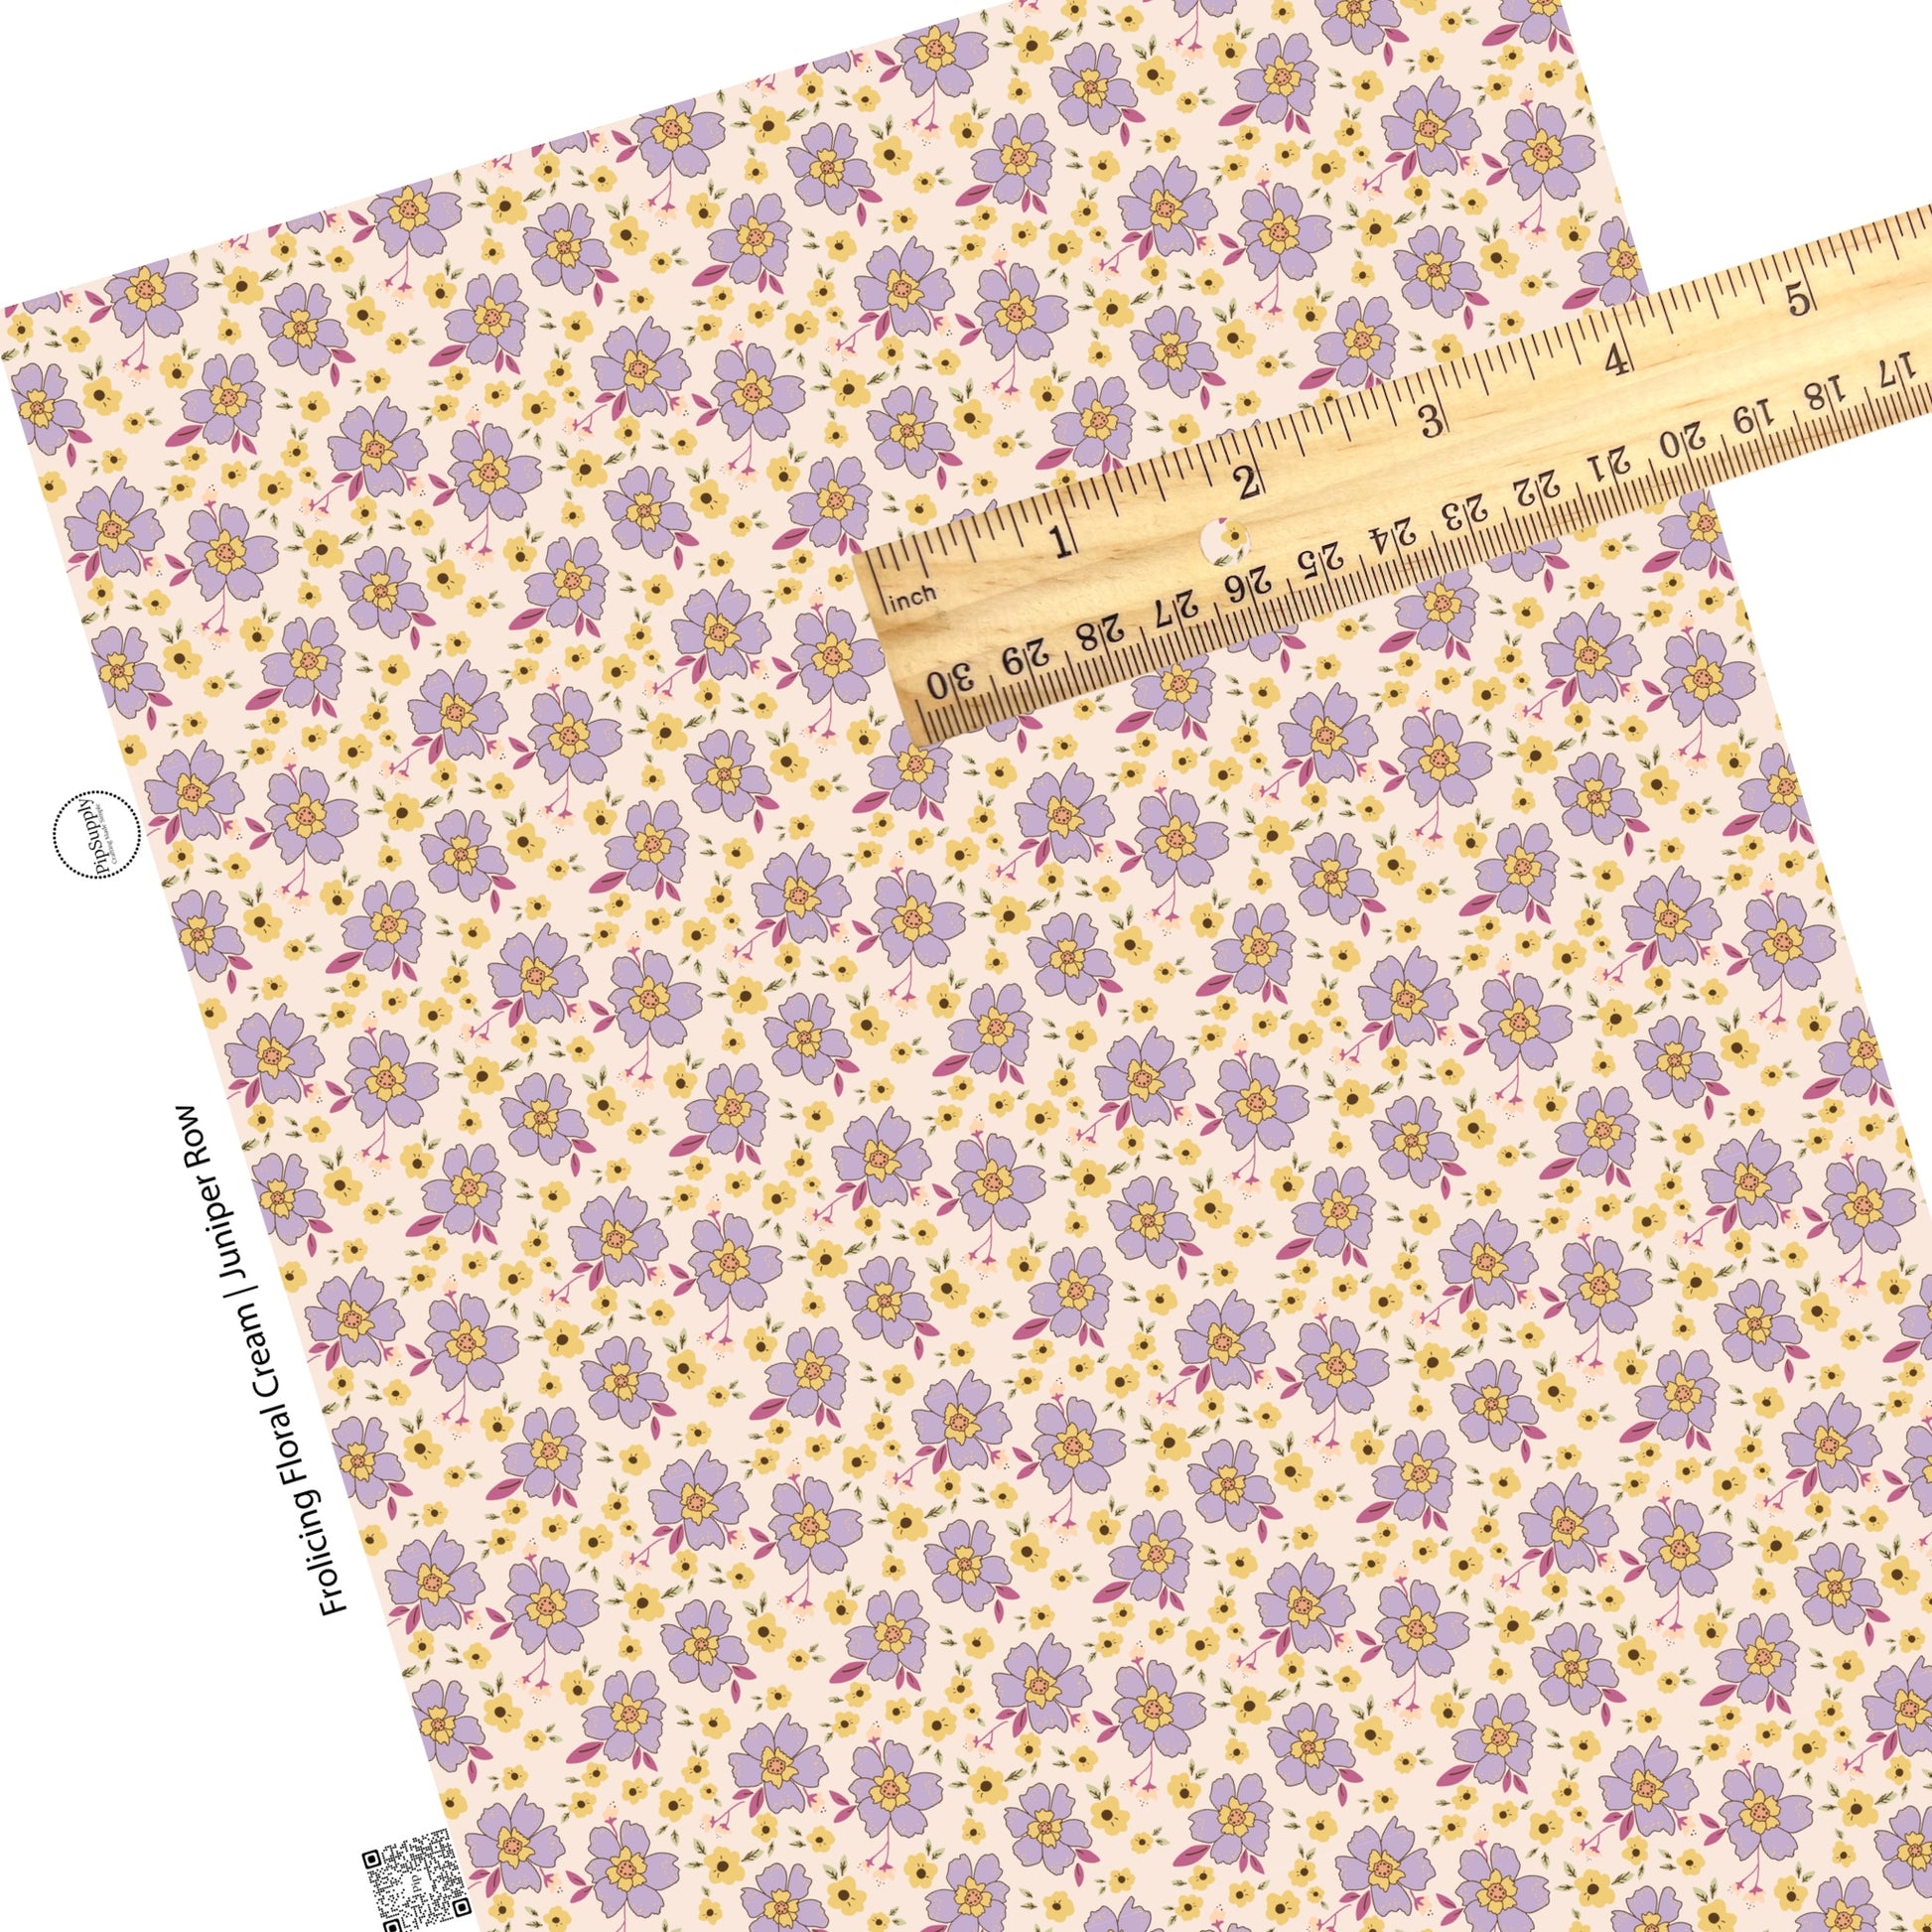 Yellow flowers with big purple flowers with purple leaves on cream faux leather sheet